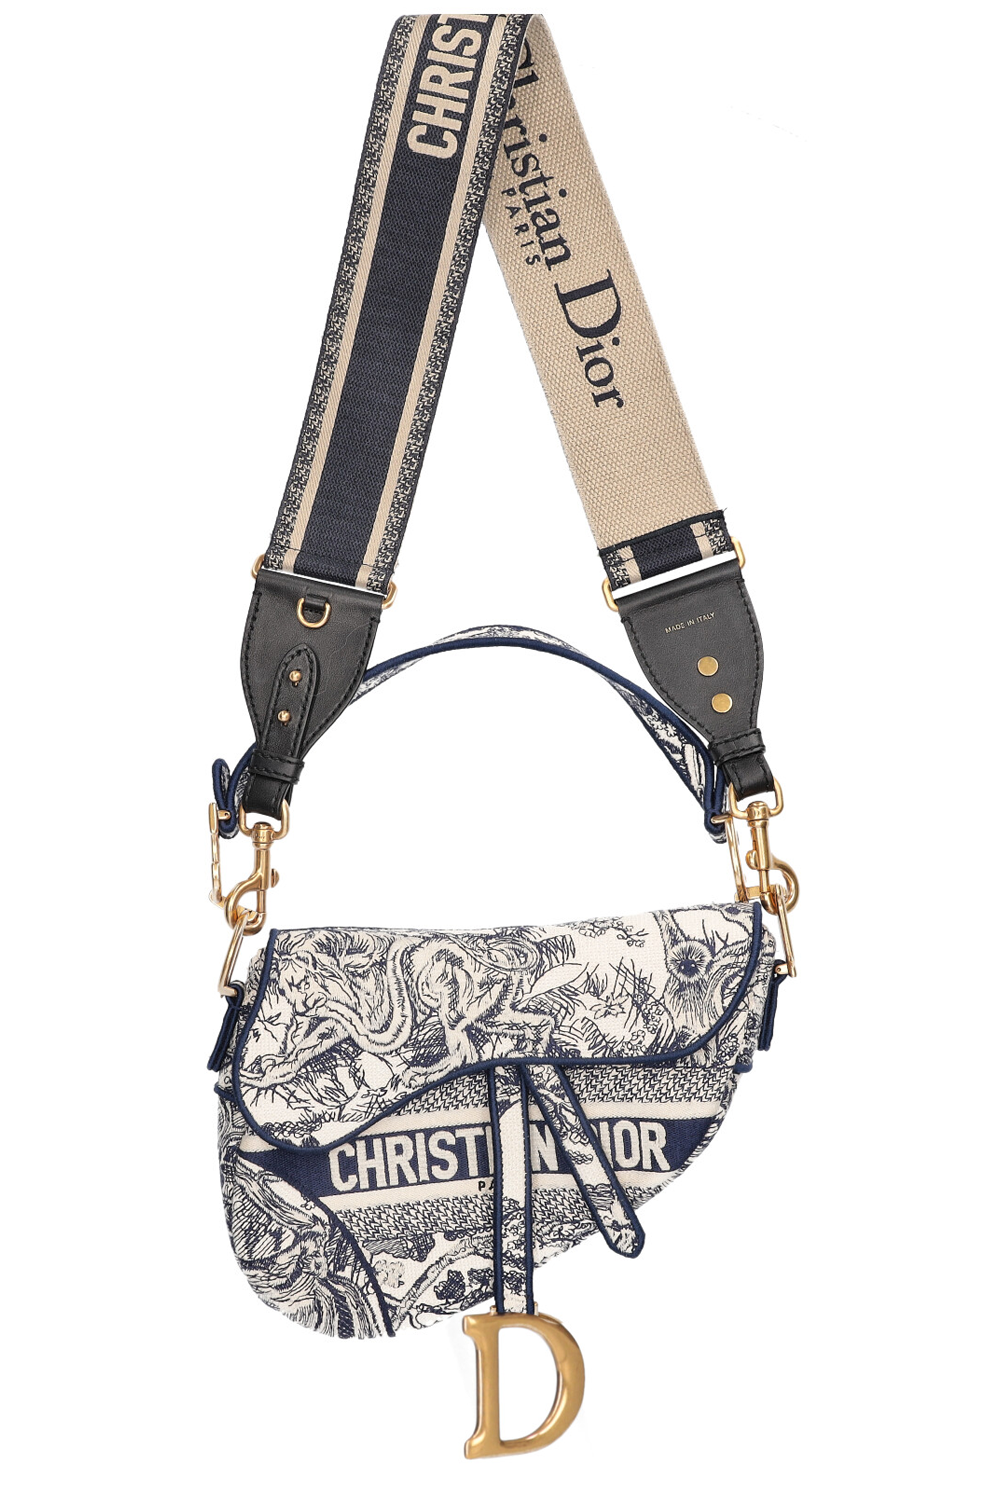 Christian Dior Saddle Bag Toile de Jouy With Strap